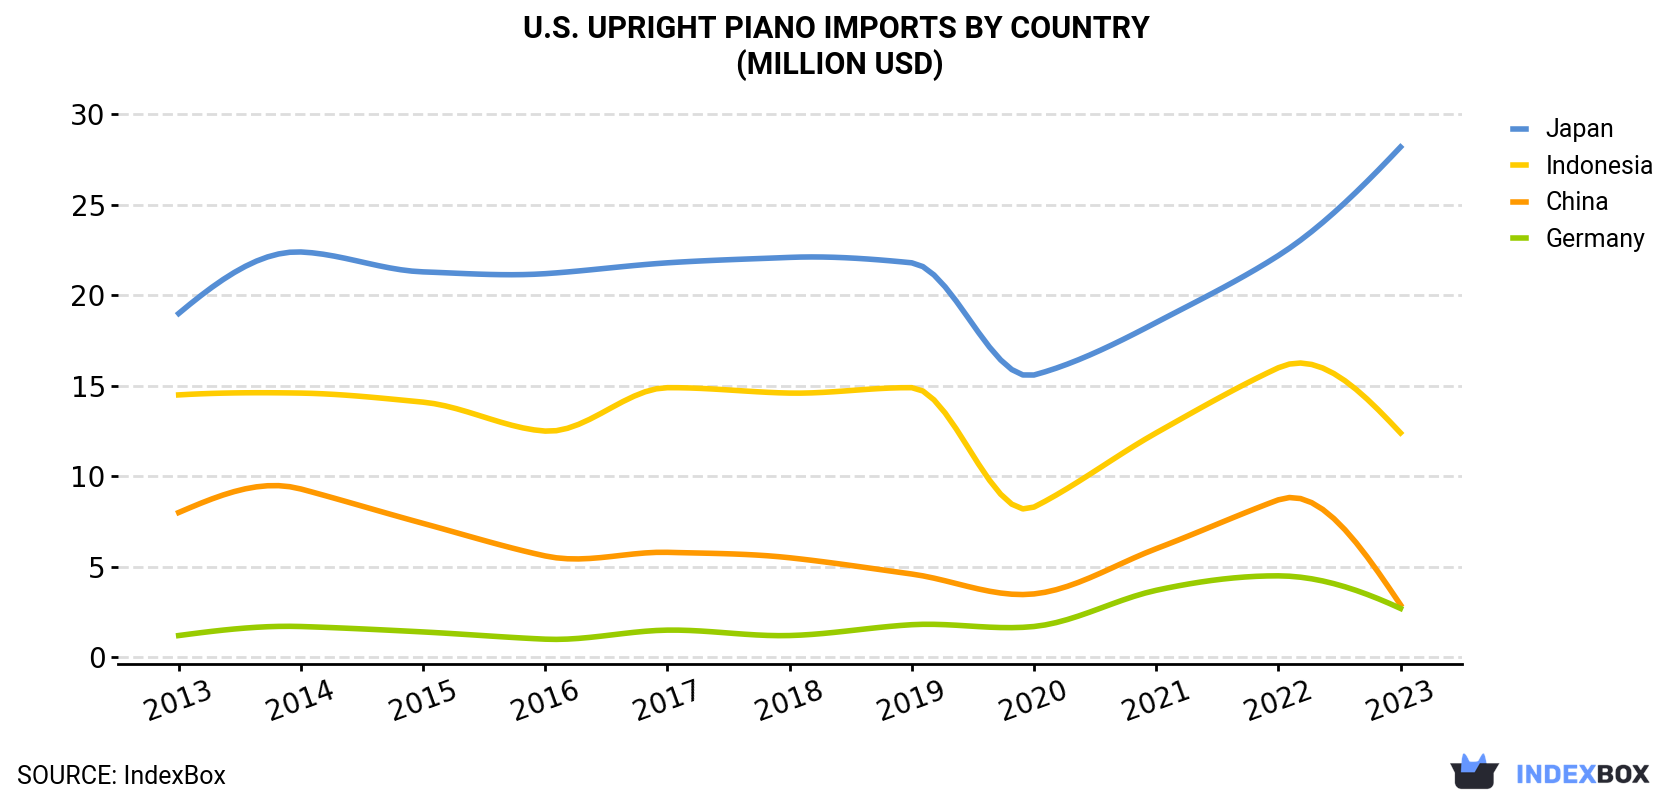 U.S. Upright Piano Imports By Country (Million USD)